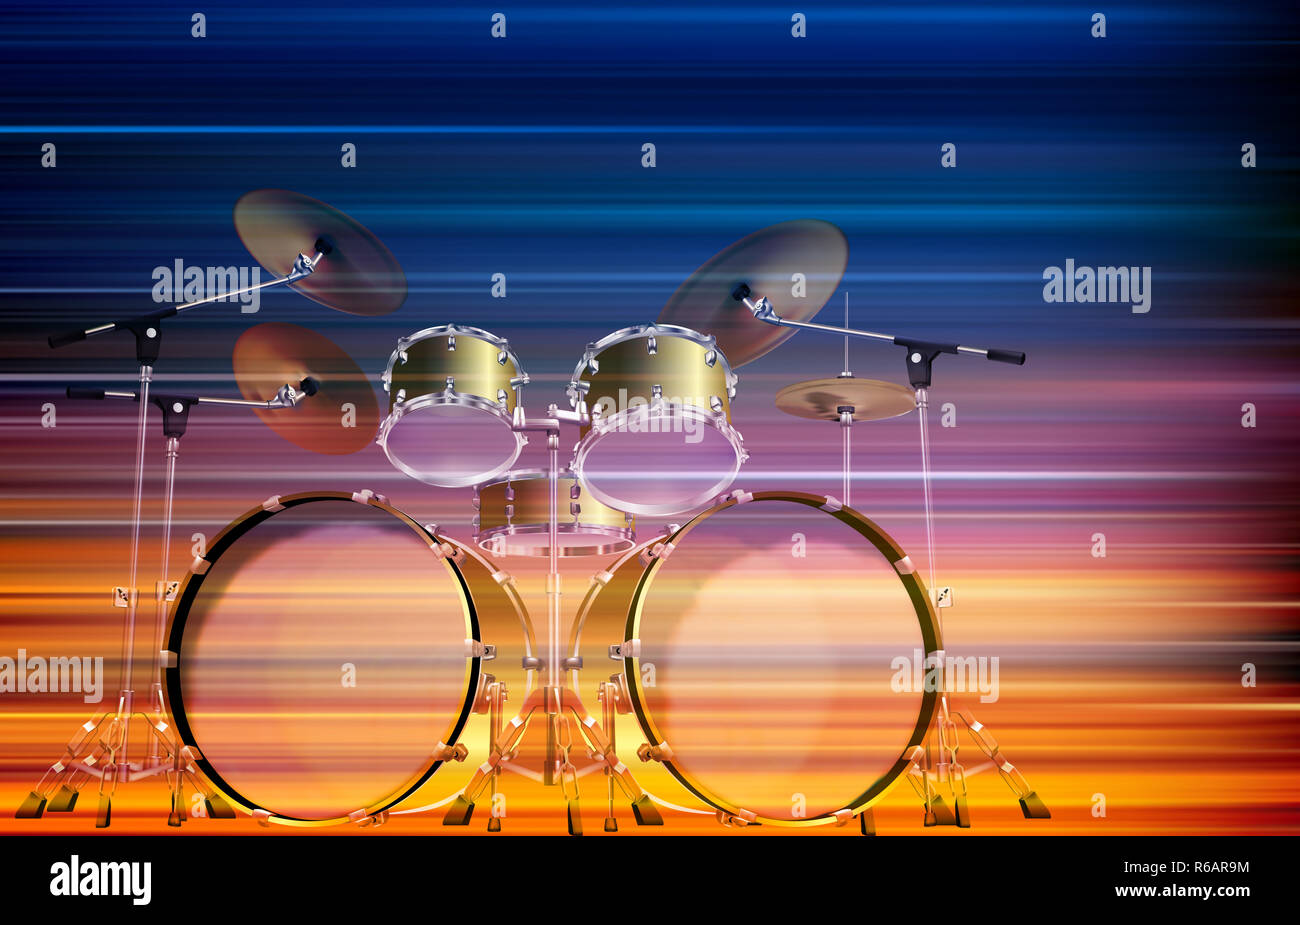 abstract grunge background with drum kit Stock Photo